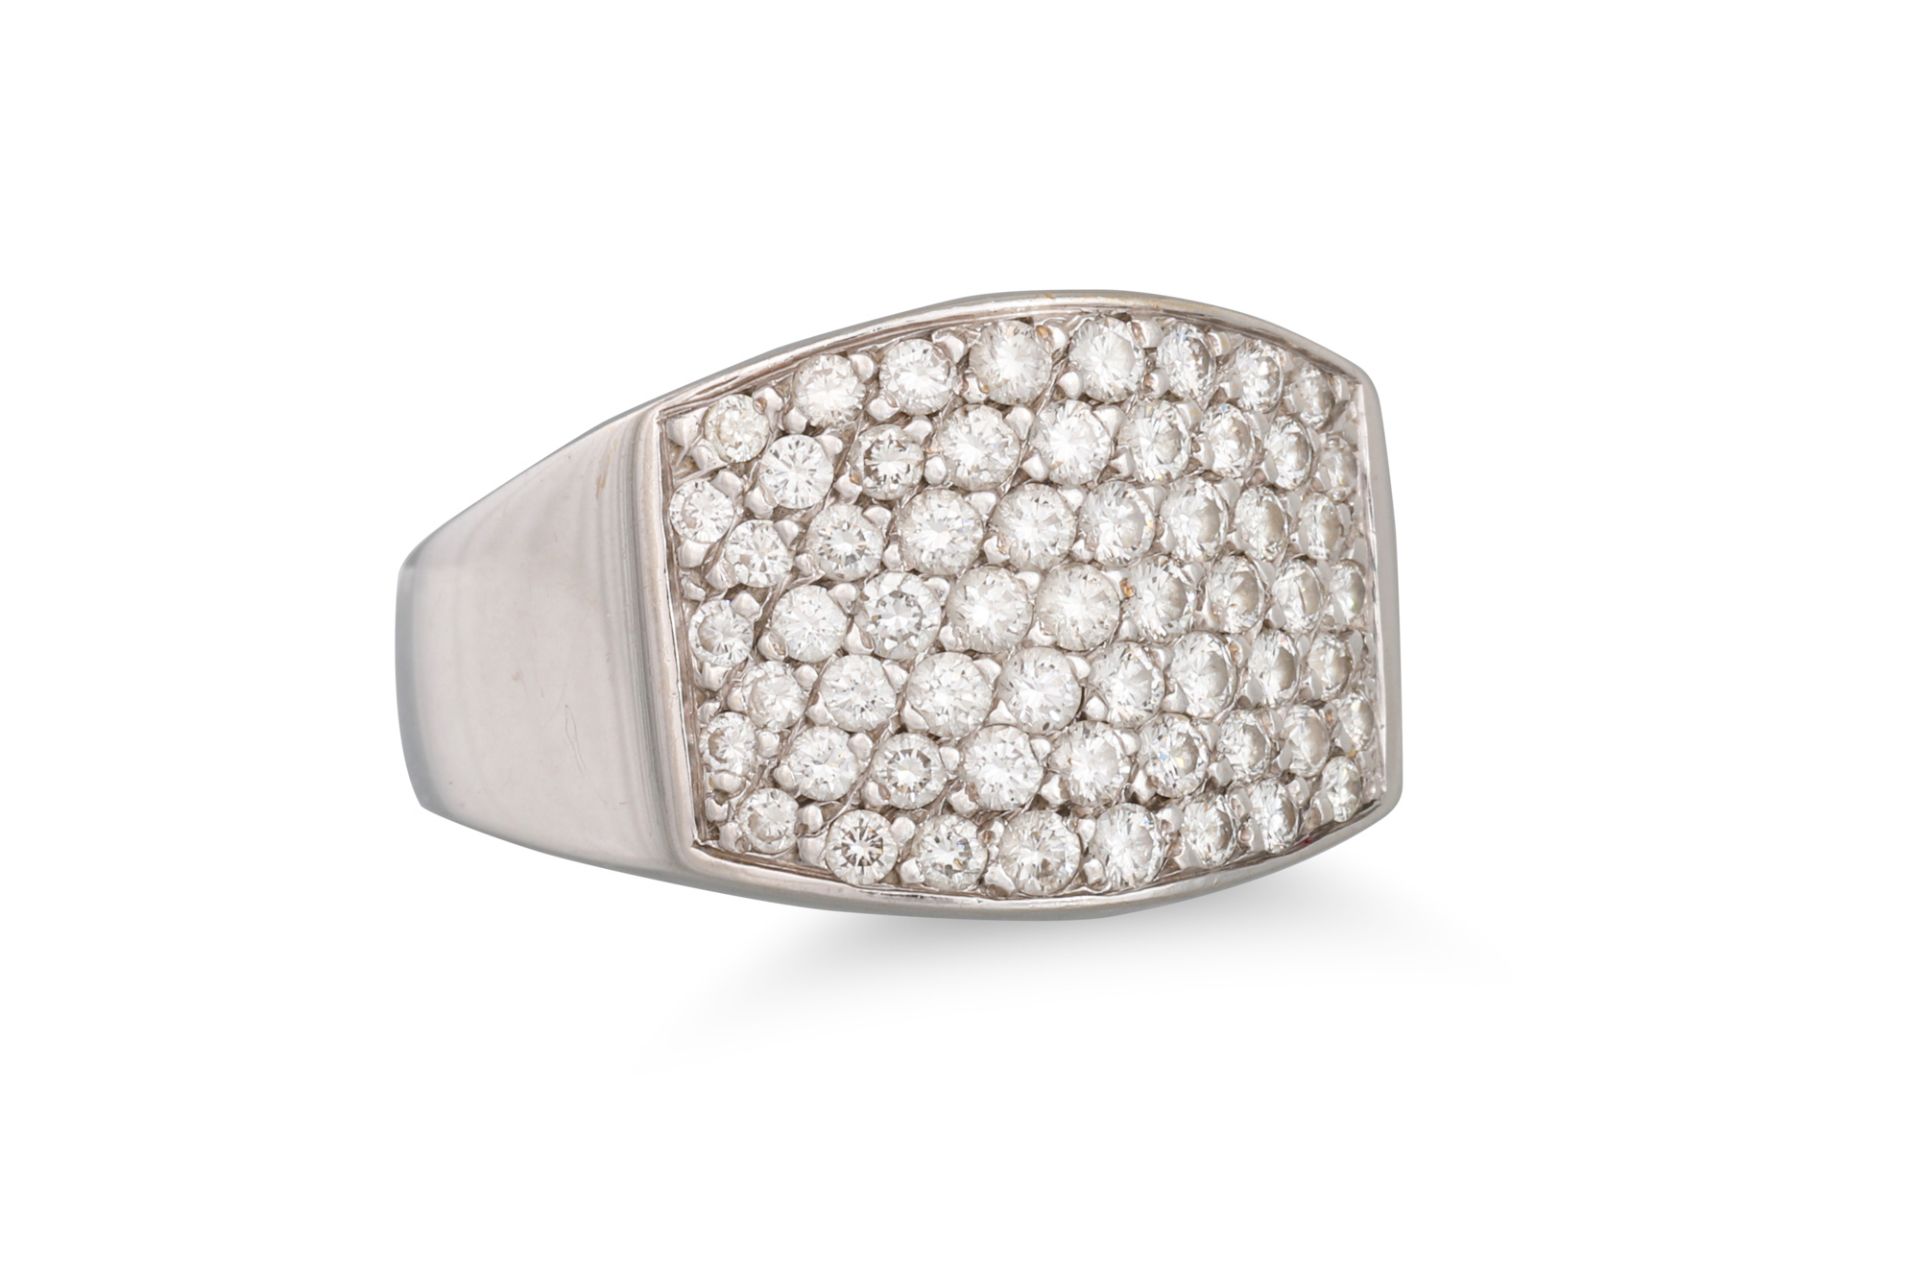 A PAVÉ SET DIAMOND RING, mounted in white metal. Estimated: weight of diamonds: 1.50 ct. size P